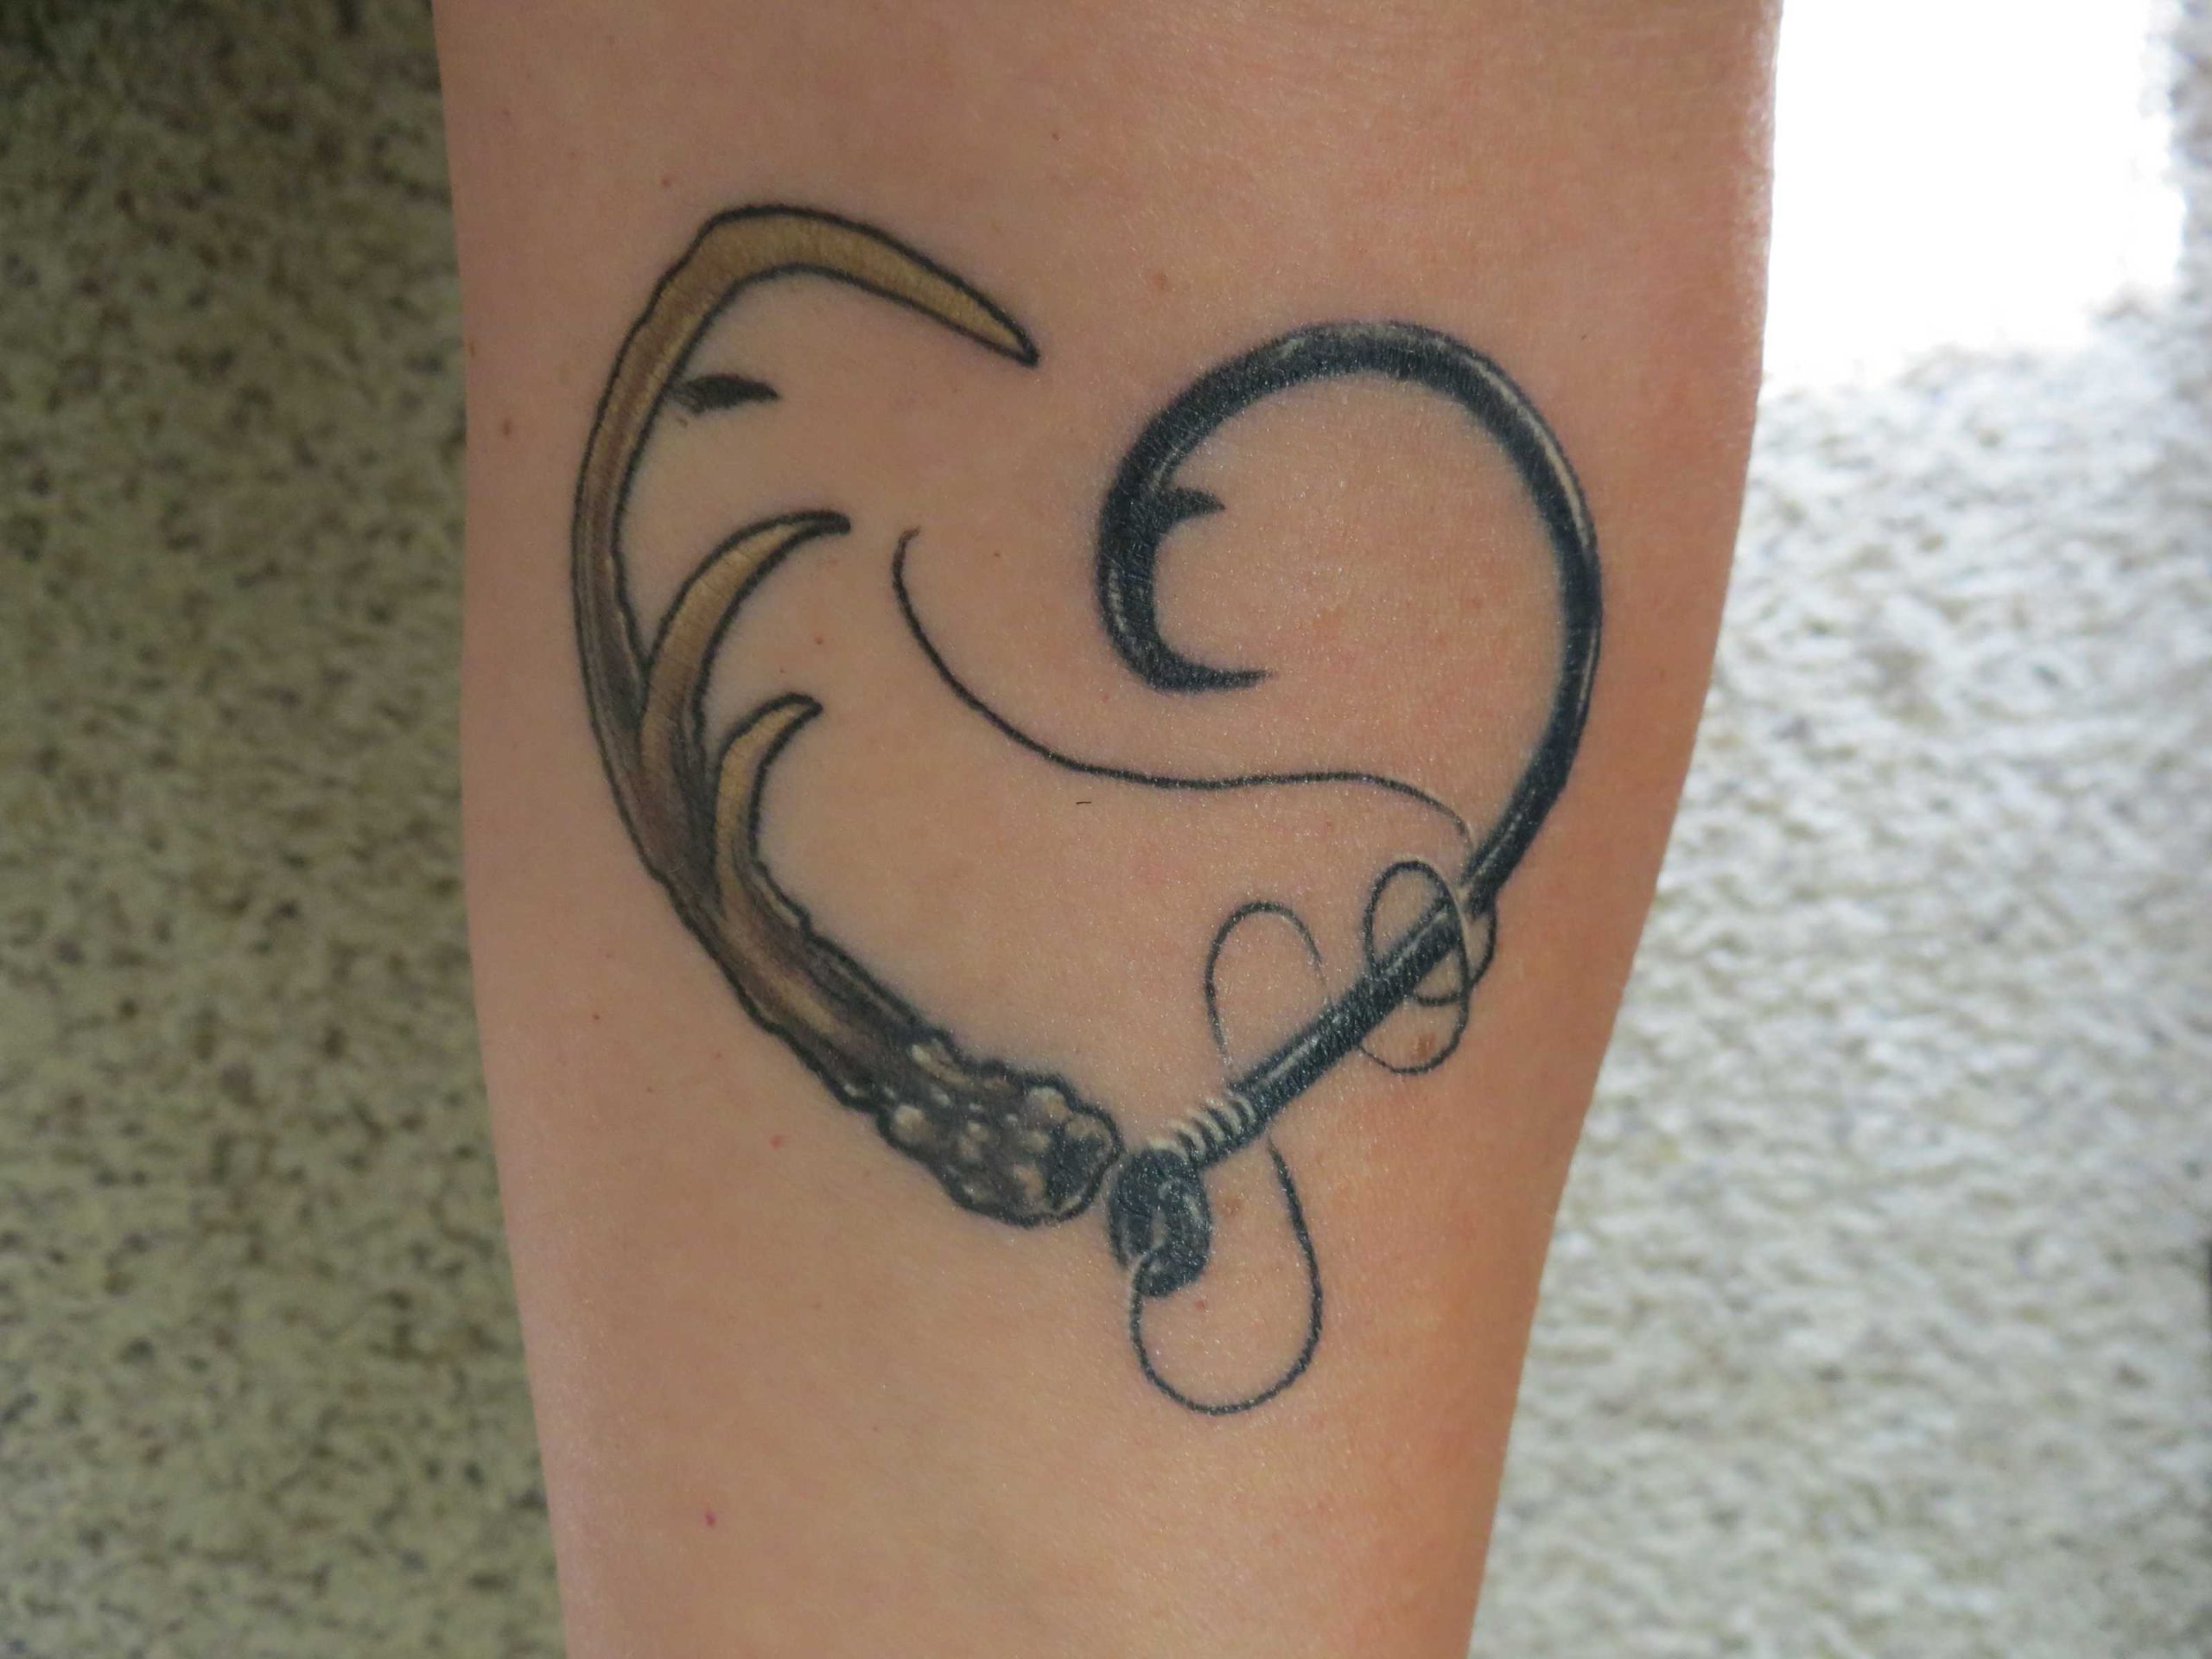 My new hunting and fishing tattoo. I love it